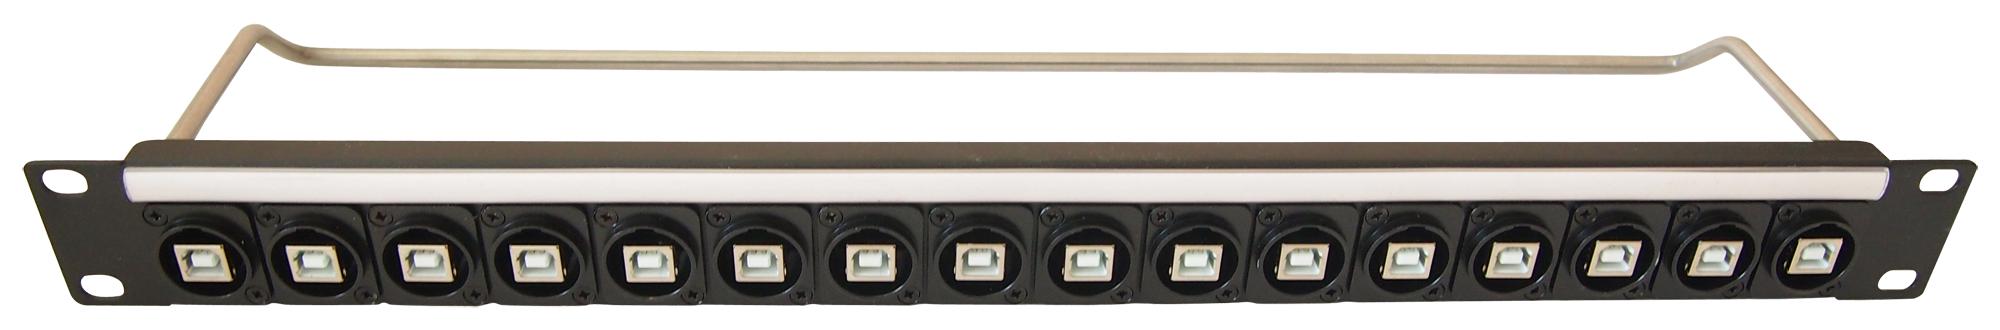 CP30176 PATCH PANEL, USB, 16PORT, 1U, M3 HOLE CLIFF ELECTRONIC COMPONENTS